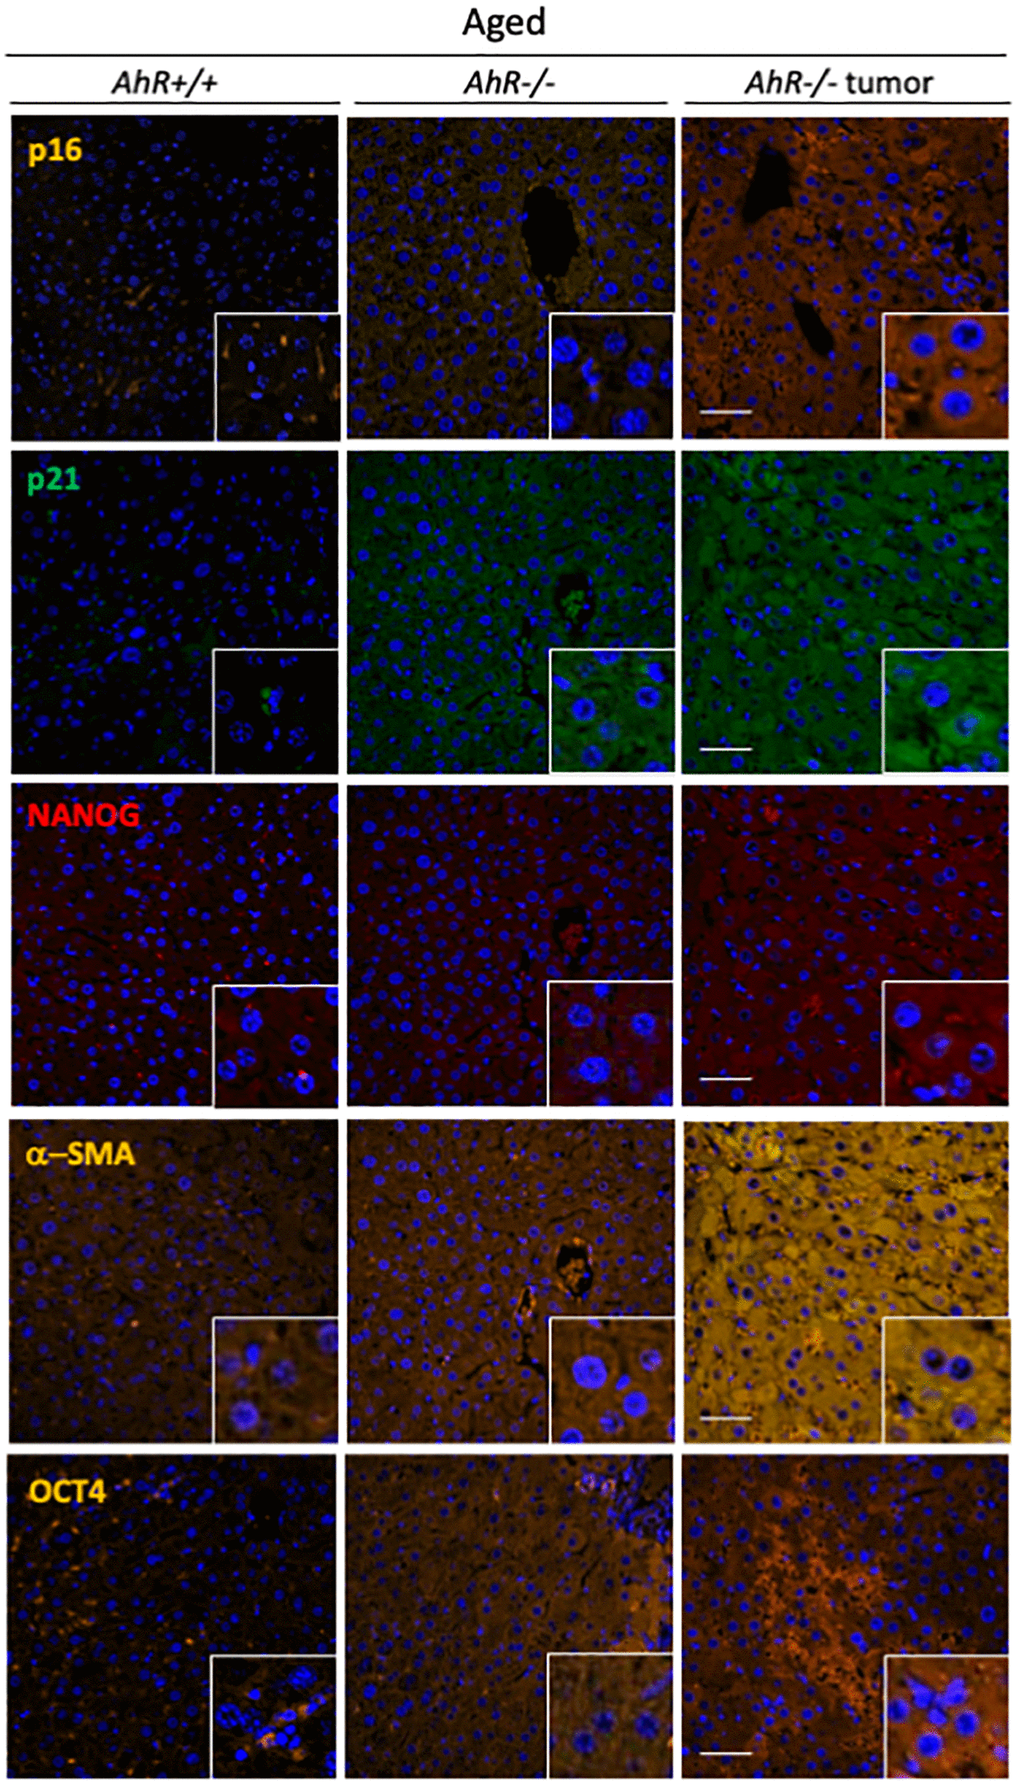 AhR−/− livers overexpress senescence and undifferentiation/stemness markers. Protein levels of senescence markers p16Ink4 and p21Cip1 and pluripotency/stemness inducers NANOG and OCT4 were analyzed by immunofluorescence in liver sections of aged AhR+/+ and AhR−/− mice and in hepatocarcinomas from AhR−/− mice. Expression of α-SMA was also analyzed as indicator of vasculogenesis. Conjugated secondary antibodies labelled with Alexa 488, Alexa 550 and Alexa 633 were used for detection. DAPI staining was used to label cell nuclei. An Olympus FV1000 confocal microscope and the FV10 software (Olympus) were used for the analysis. Scale bar corresponds to 50 μm.